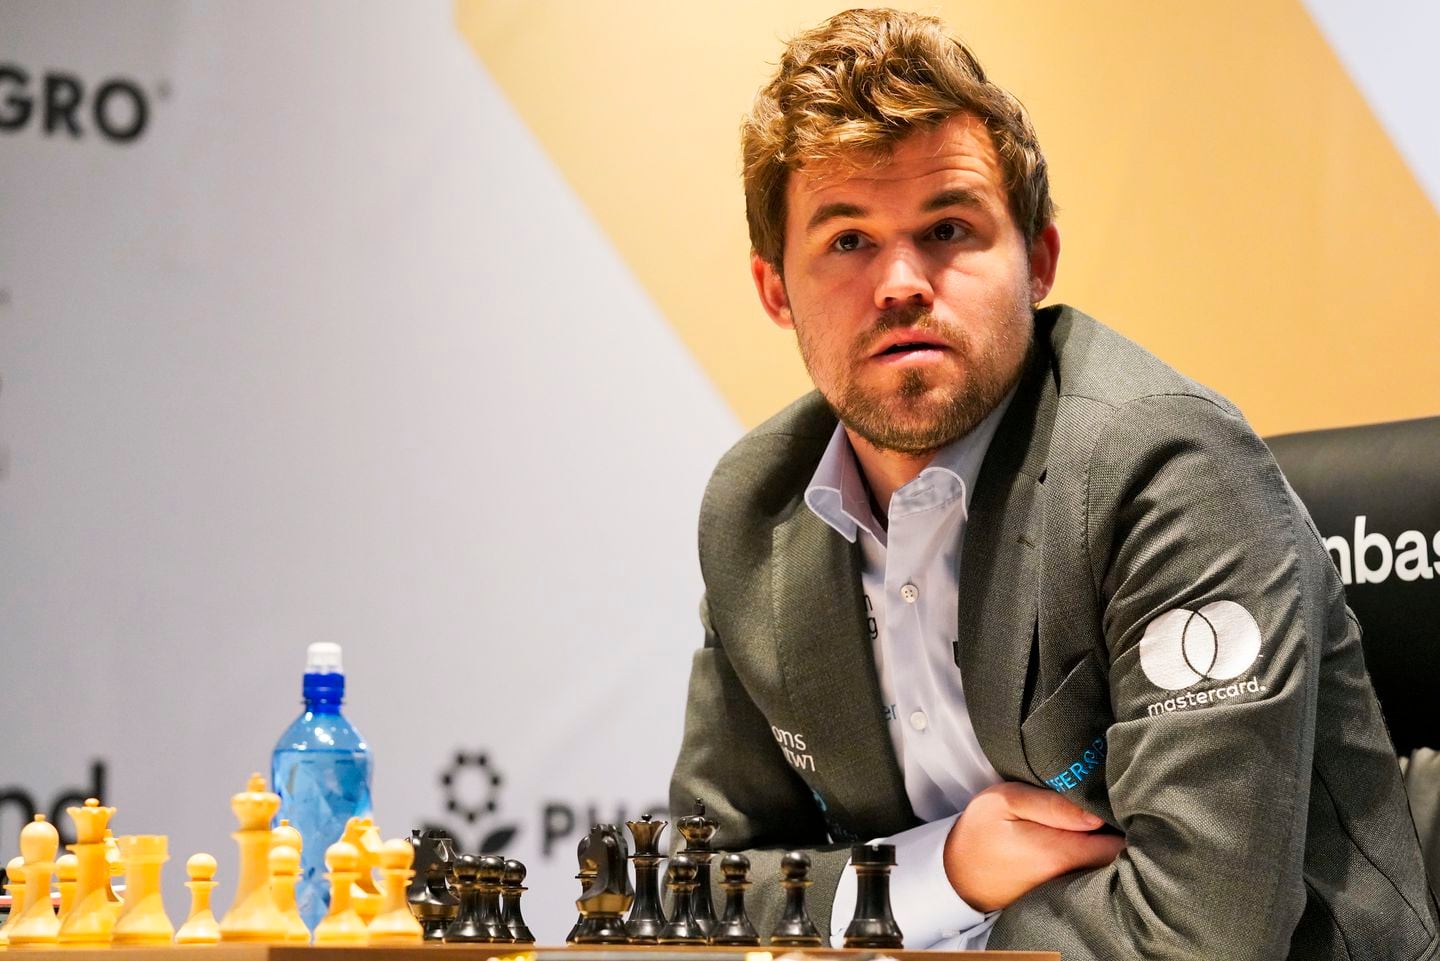 Top 5 Checkmates By a Pawn [Including Magnus Carlsen's En Passant